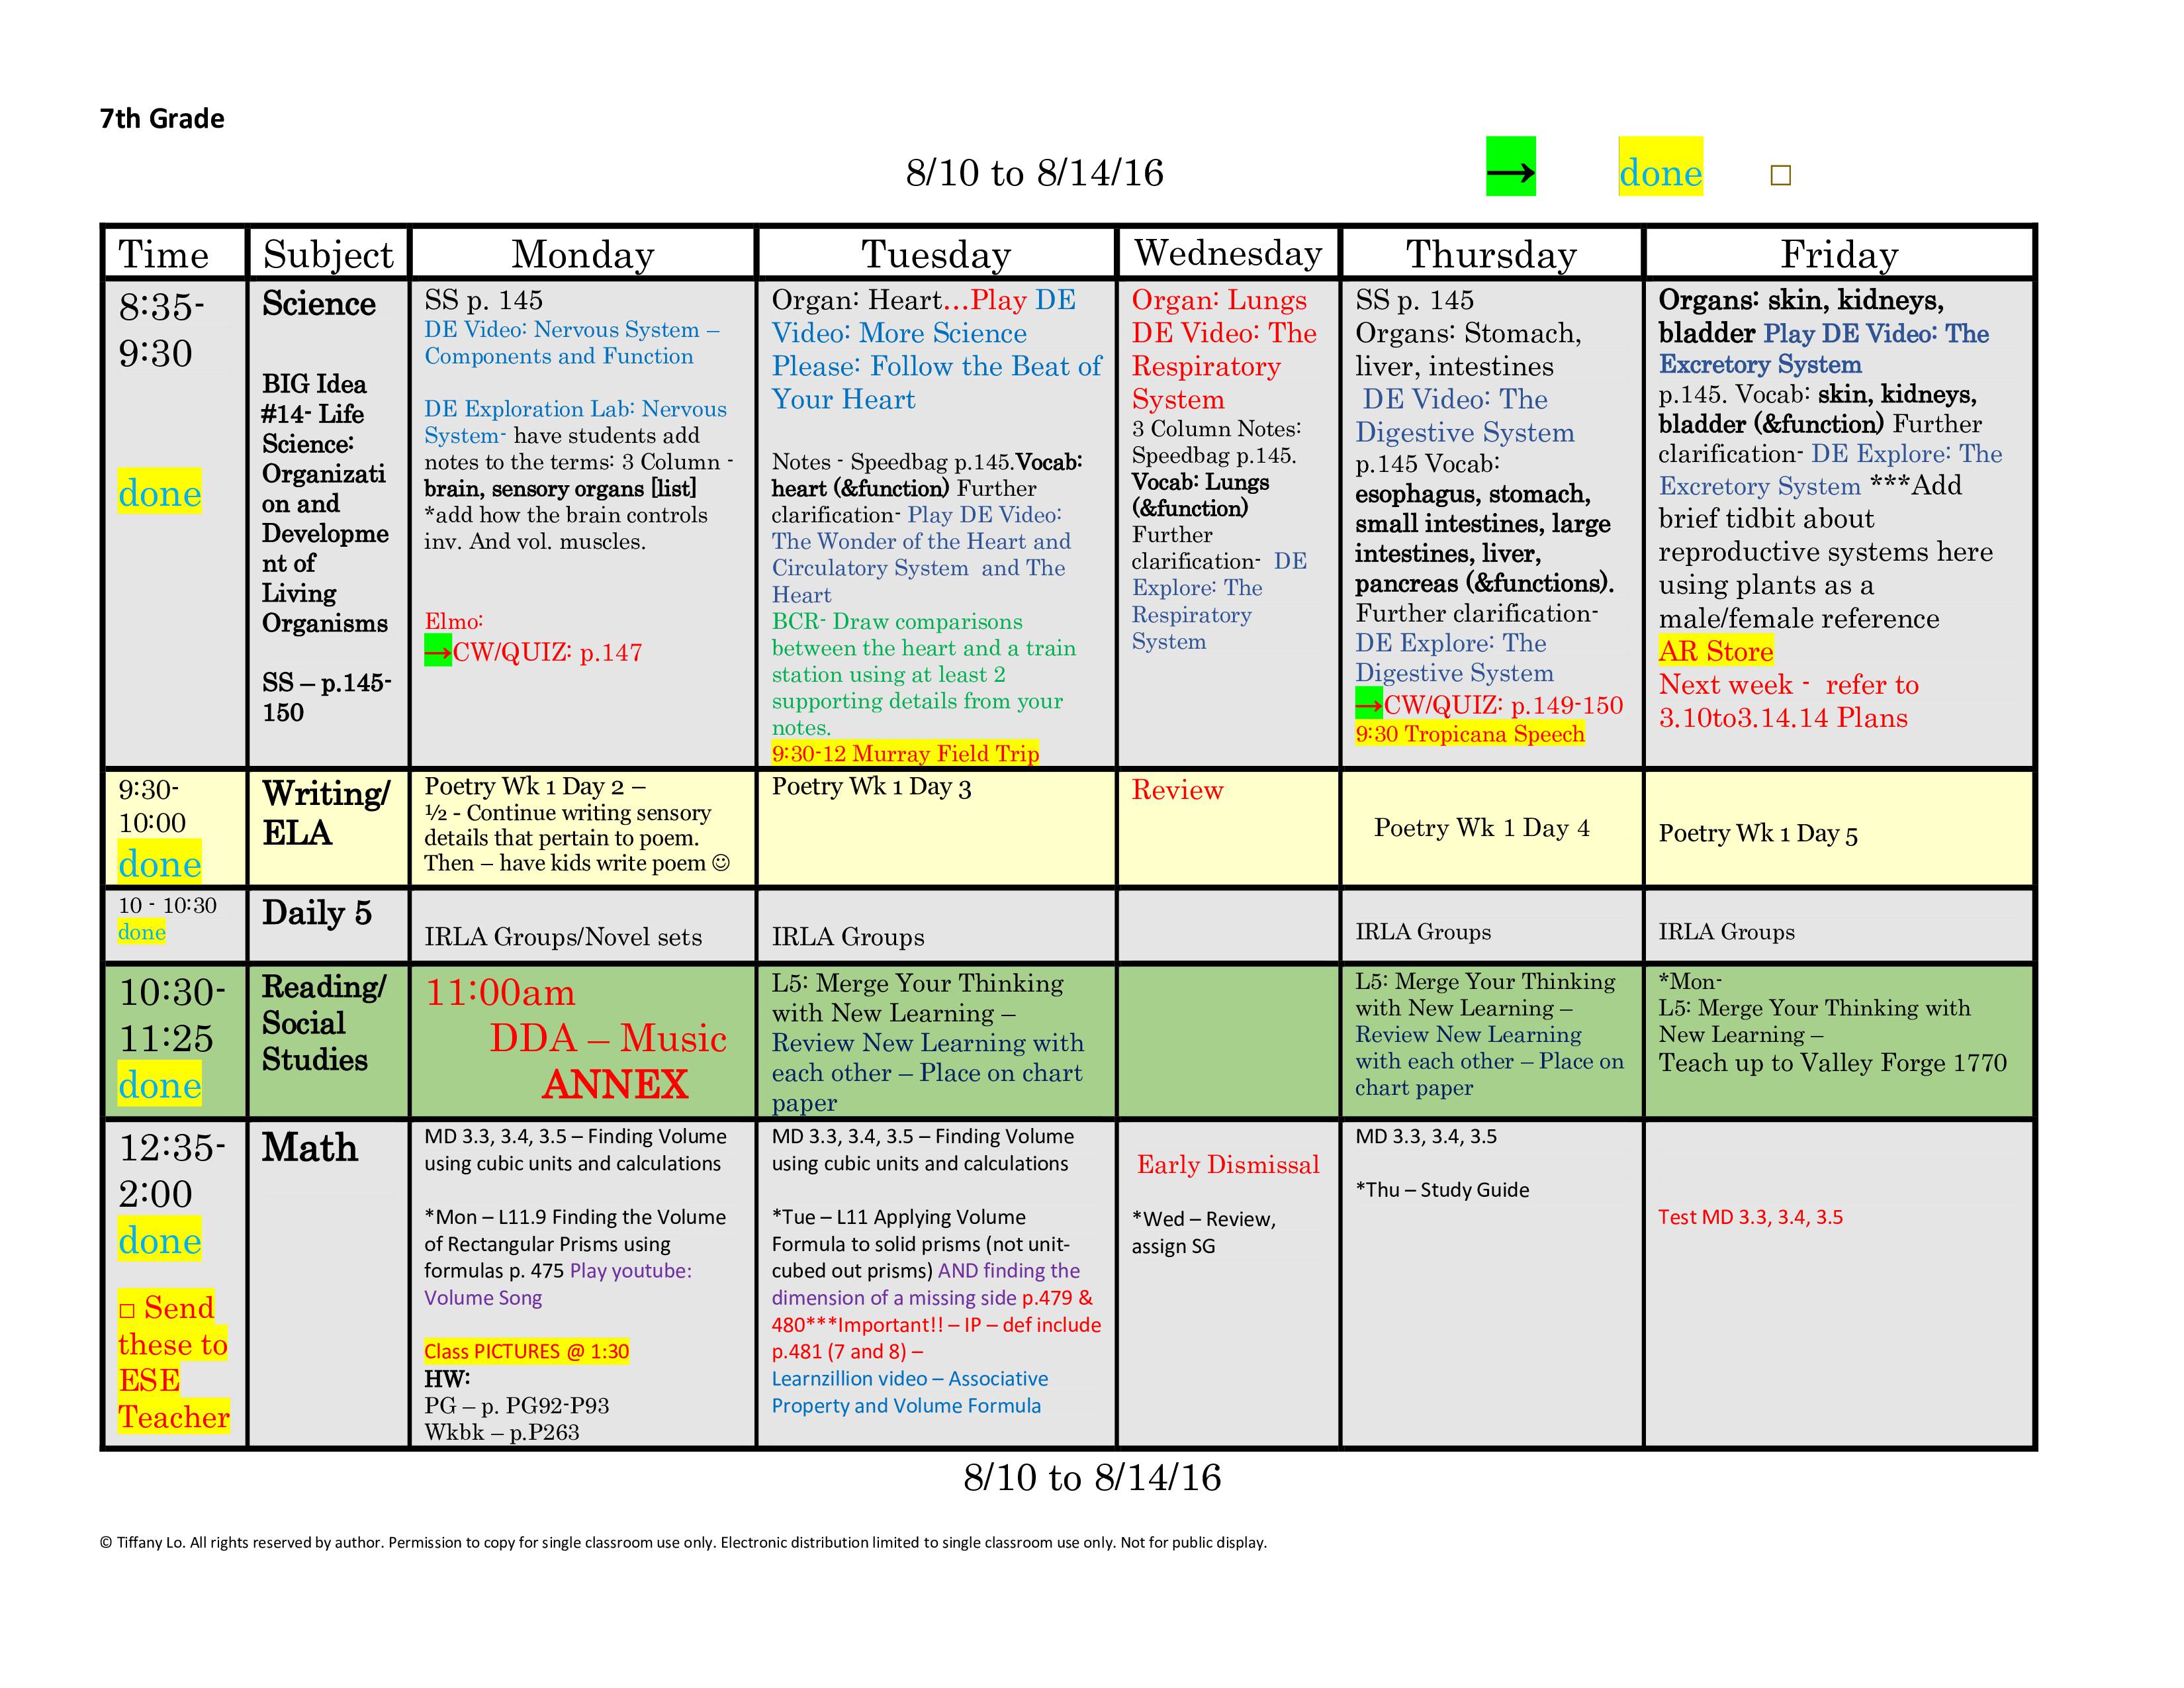 7th-seventh-grade-lesson-plan-template-one-week-one-page-glance-of